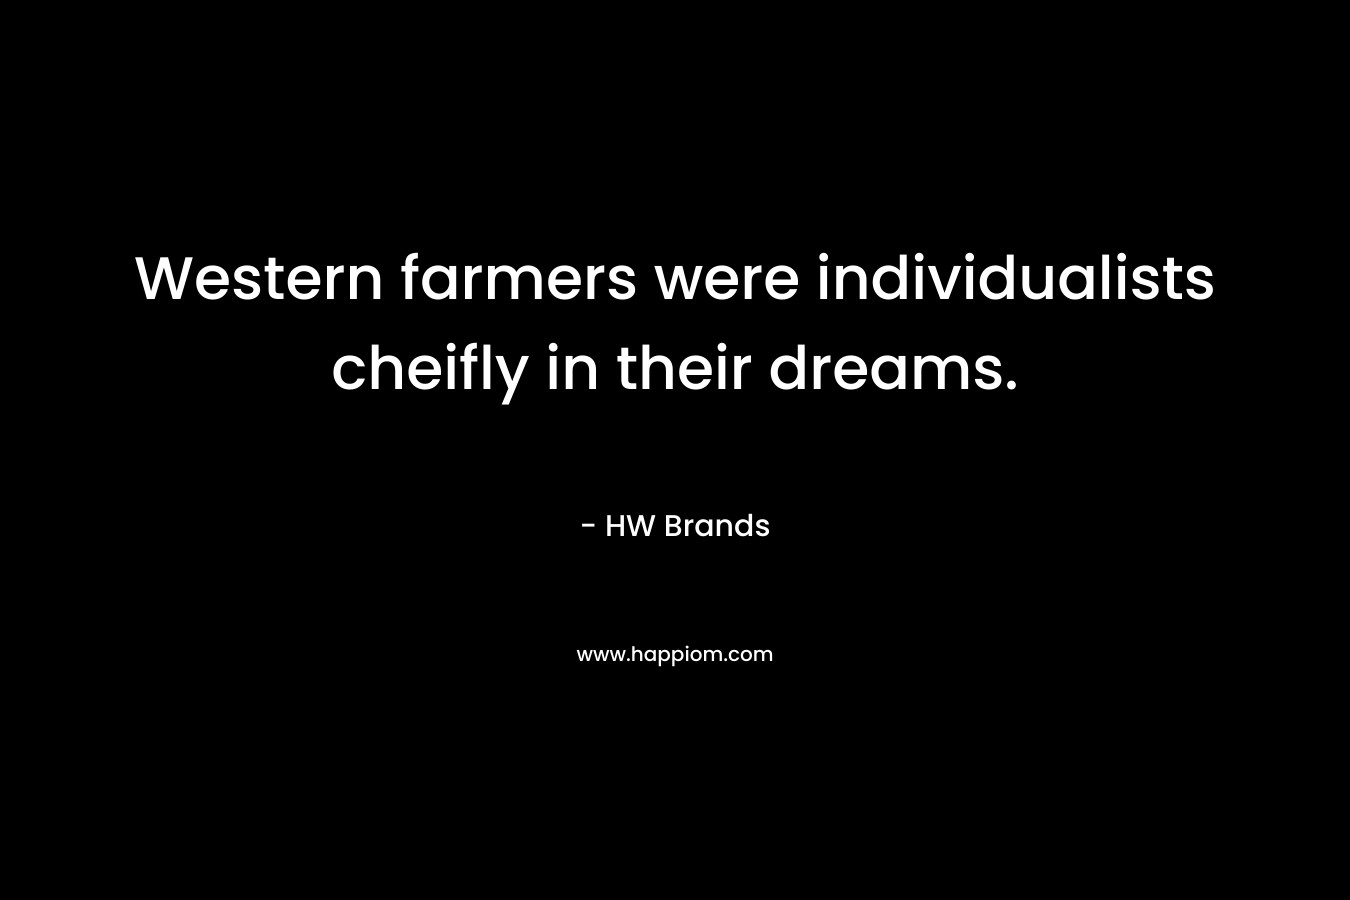 Western farmers were individualists cheifly in their dreams.